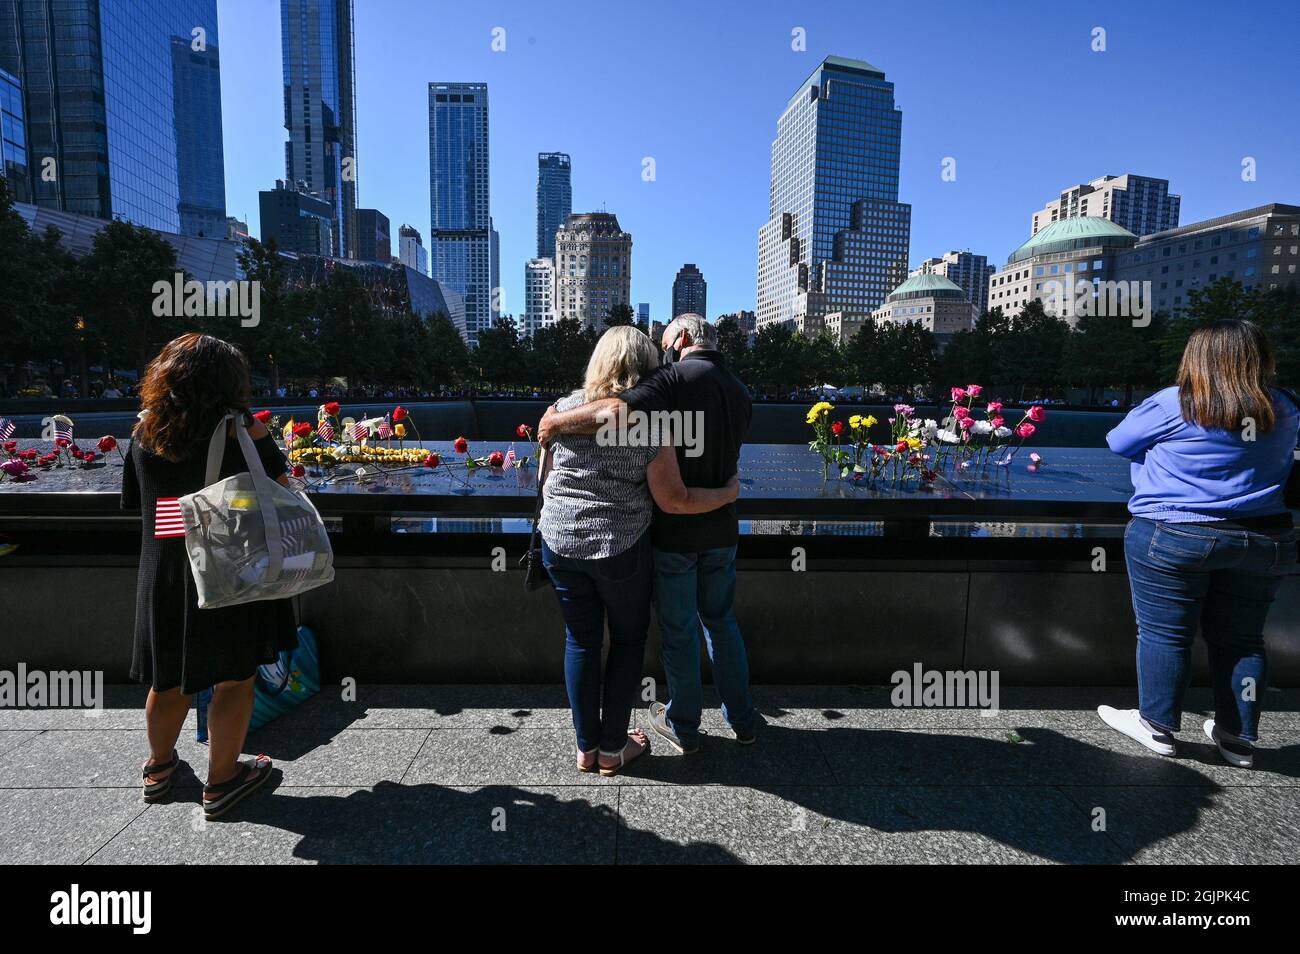 New York, United States. 11th Sep, 2021. People view the memorial at a ceremony at Ground Zero held in commemoration of the 20th anniversary of the terrorist attacks on the World Trade Center, the Pentagon and the crash of United Airlines Flight 93 in Shanksville, PA, held in lower Manhattan, New York City, on Saturday, September 11, 2021. Pool photo by Anthony Behar/UPI Credit: UPI/Alamy Live News Stock Photo